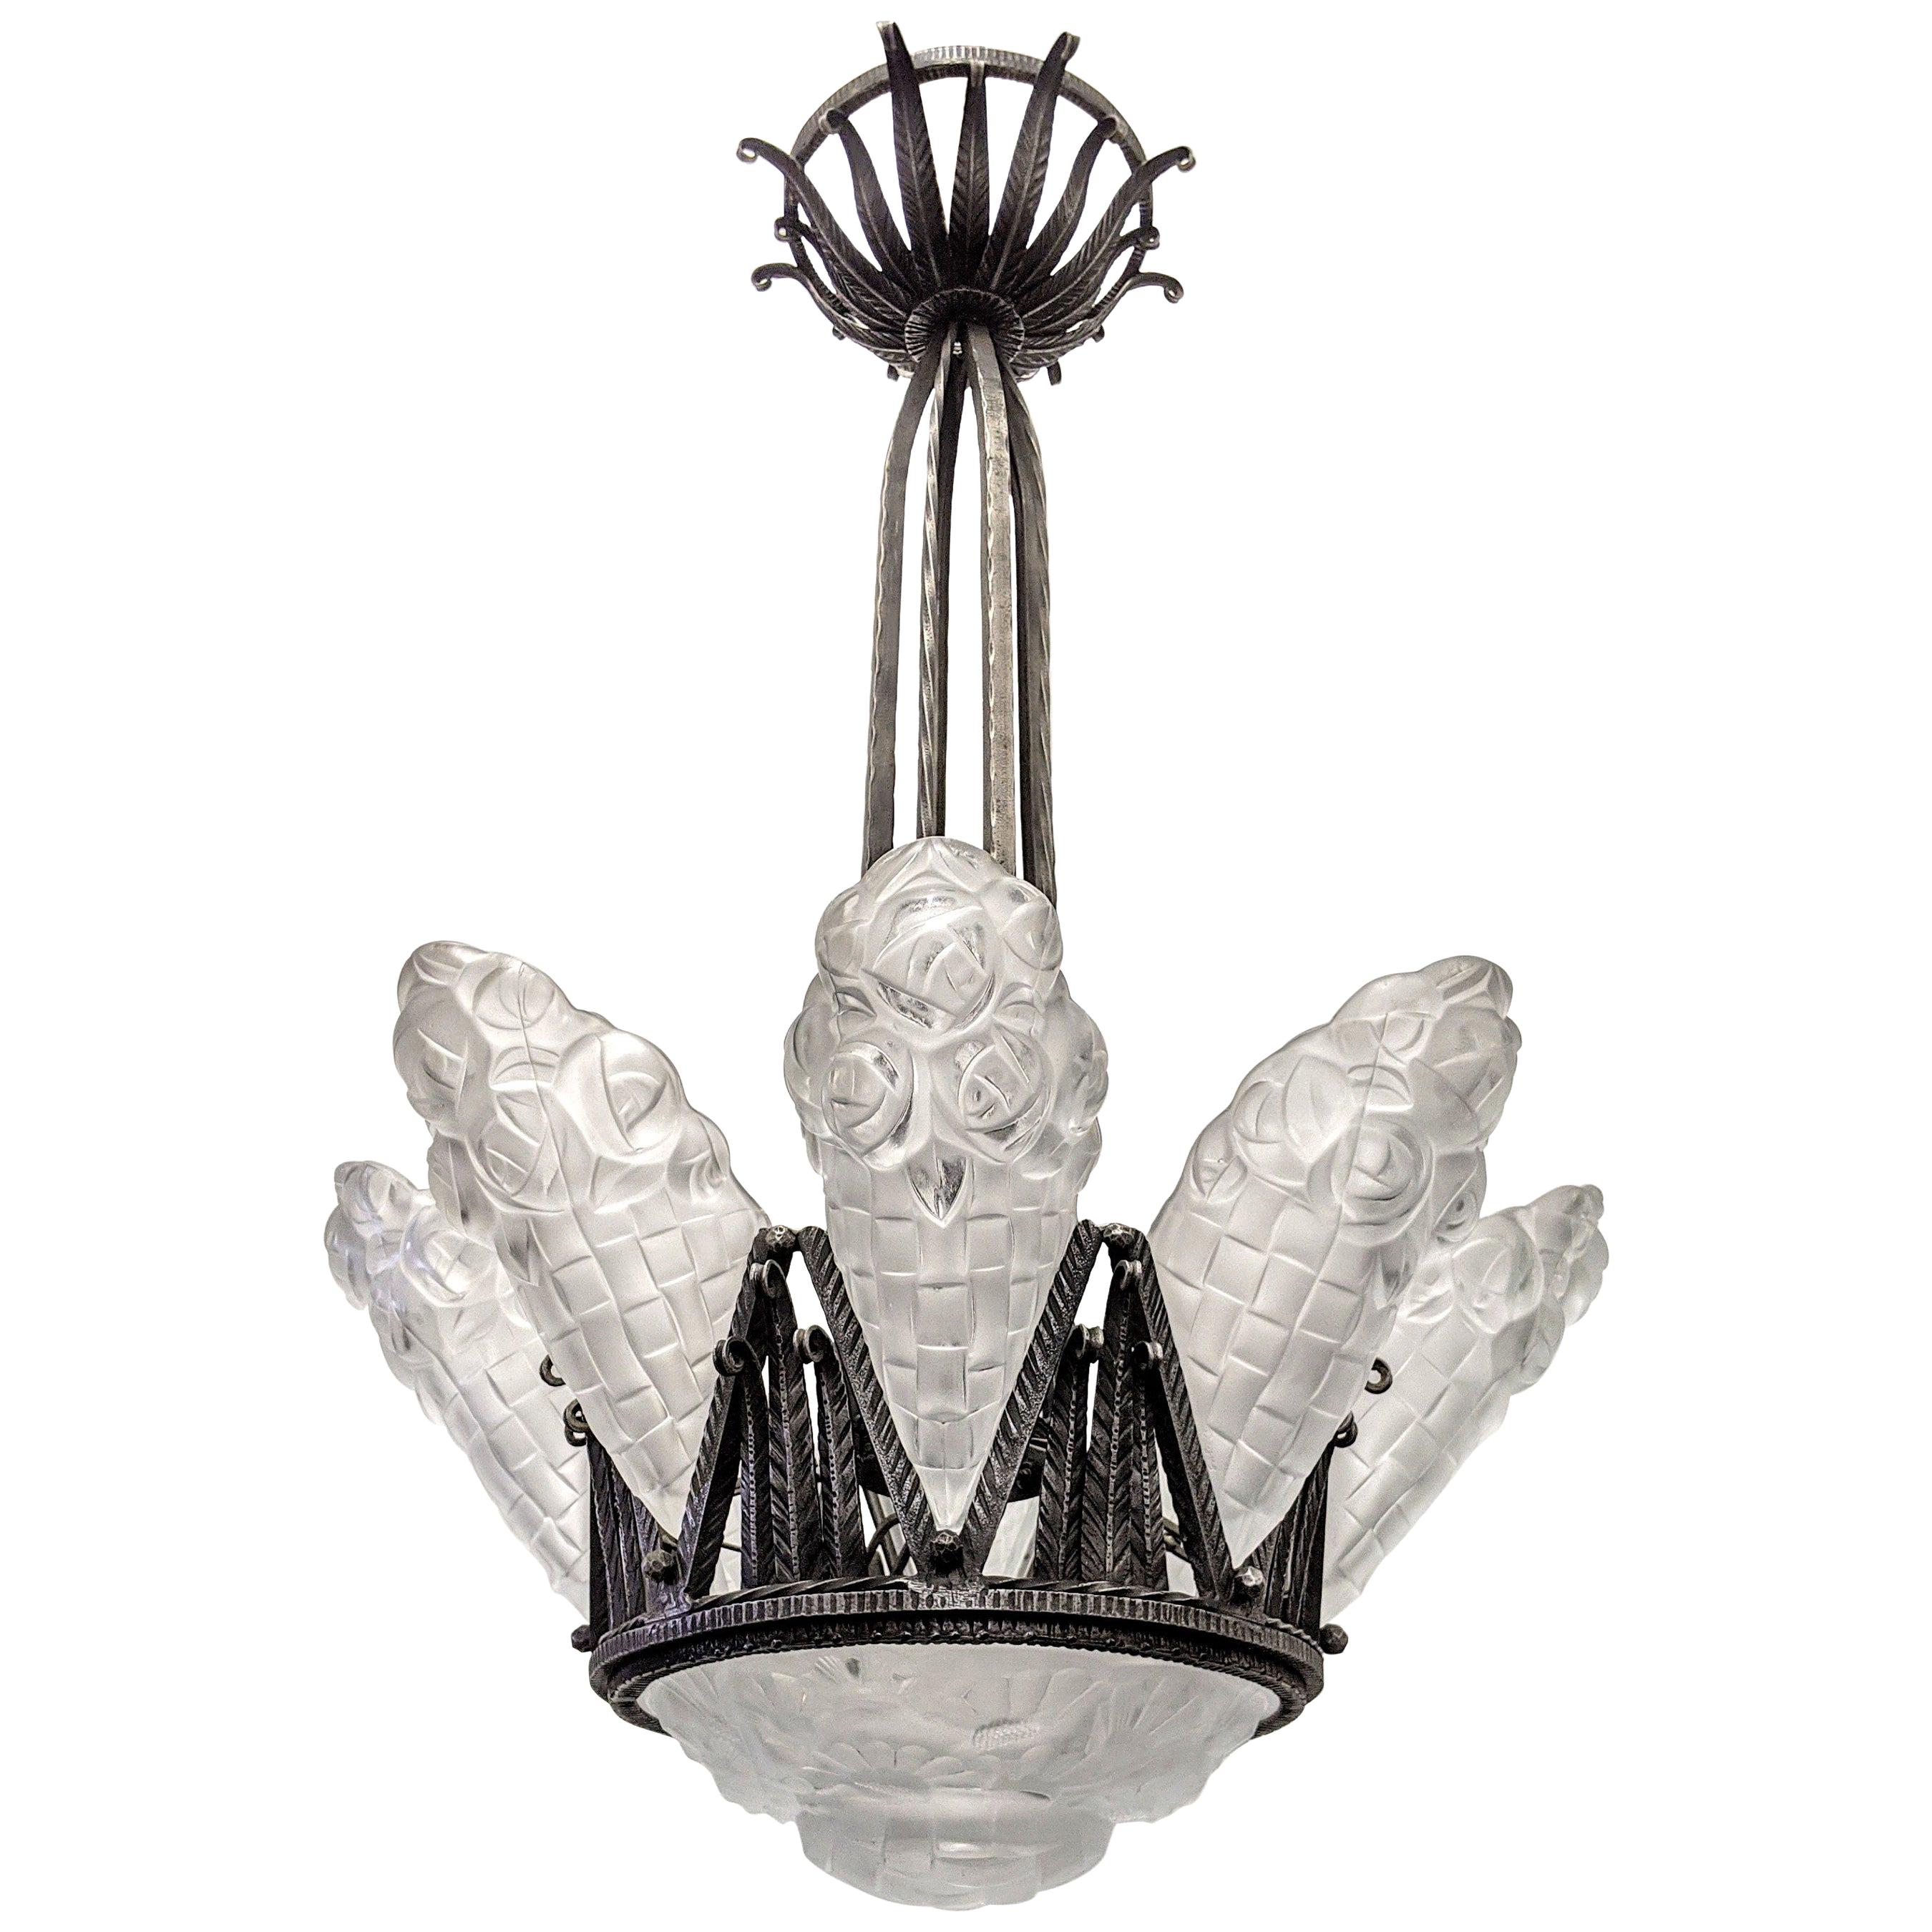 French Art Deco Chandelier by Degué